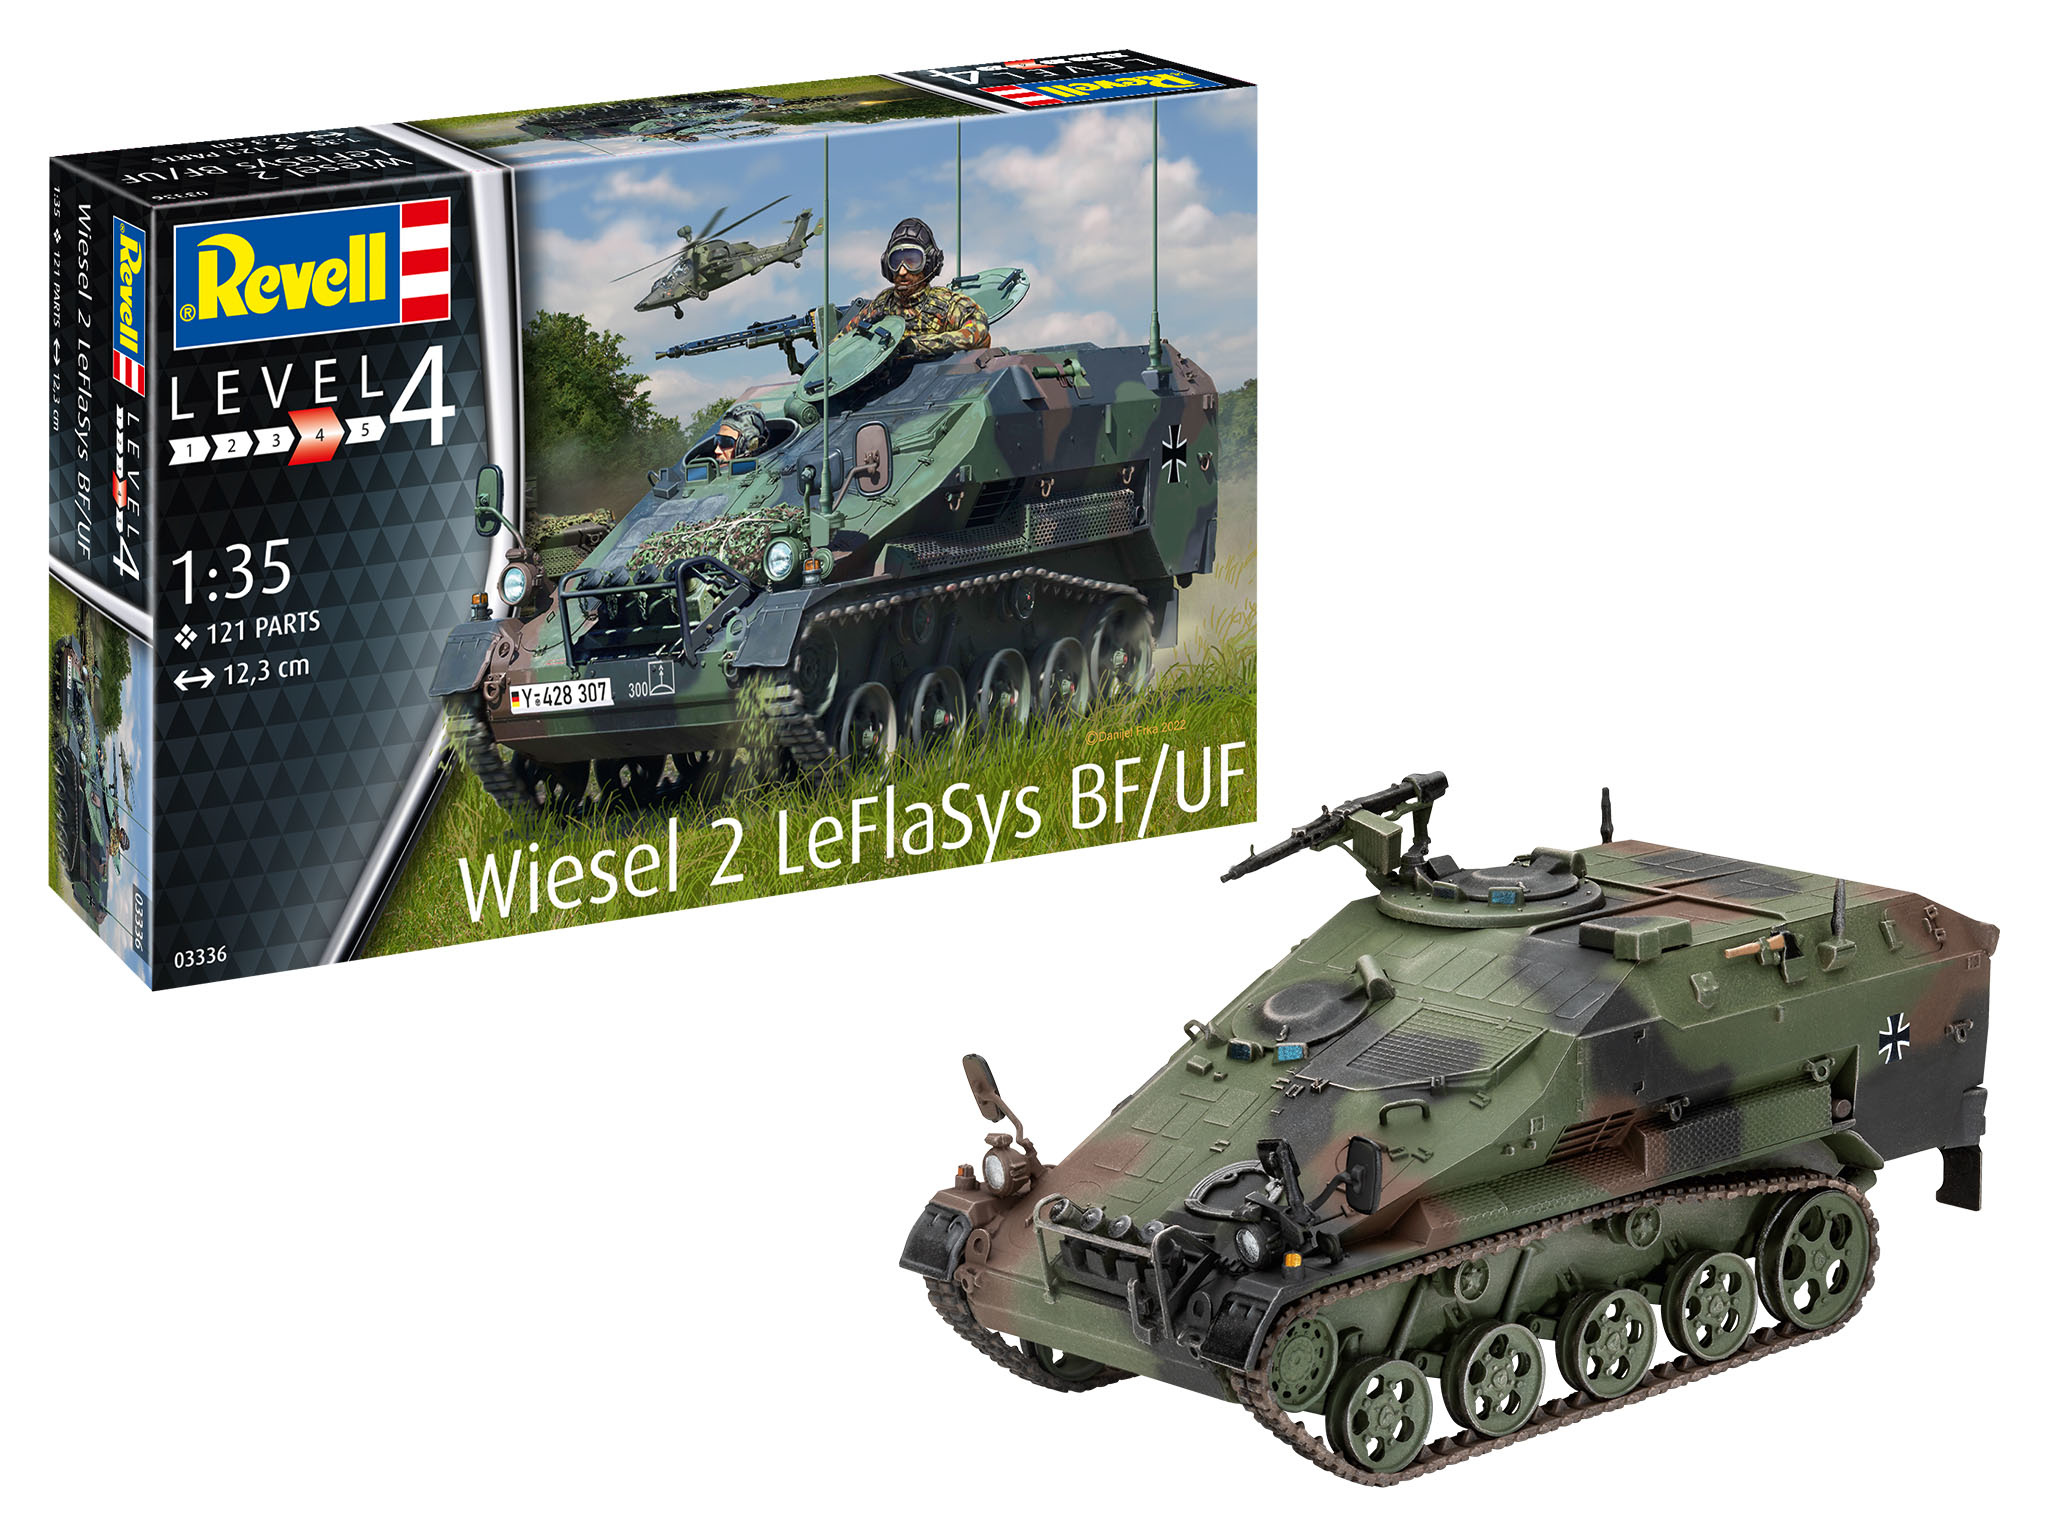 1:35 Wiesel 2 LeFlaSys BF/UF-1